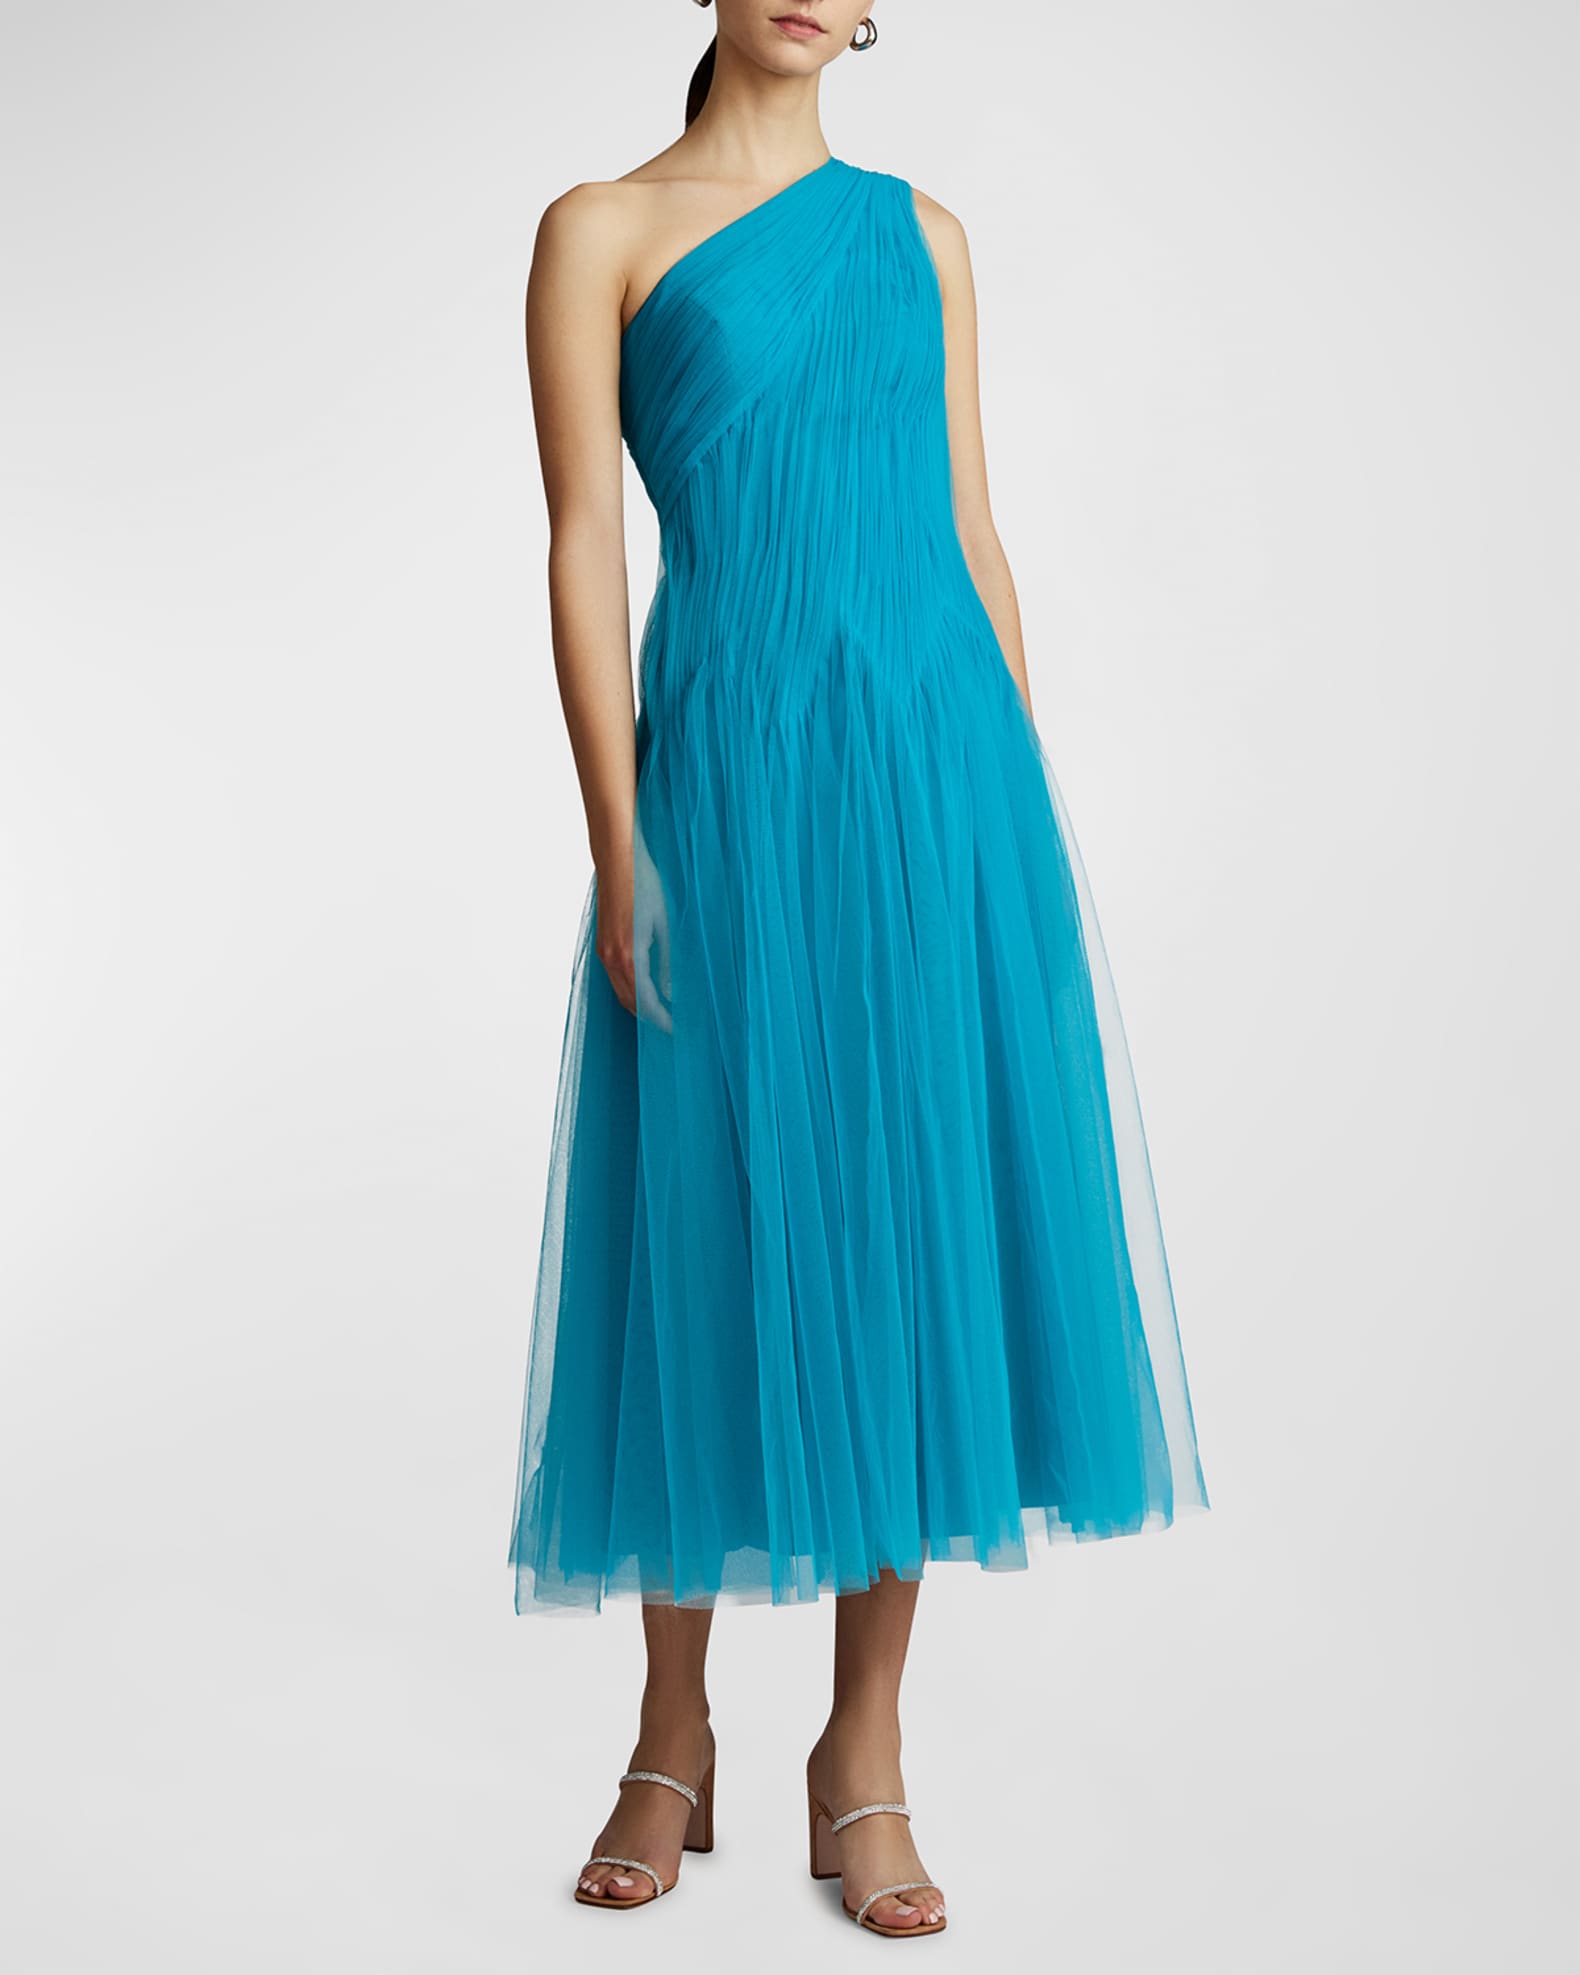 Shop Sienna, Tulle Straight Gown by Monique Lhuillier